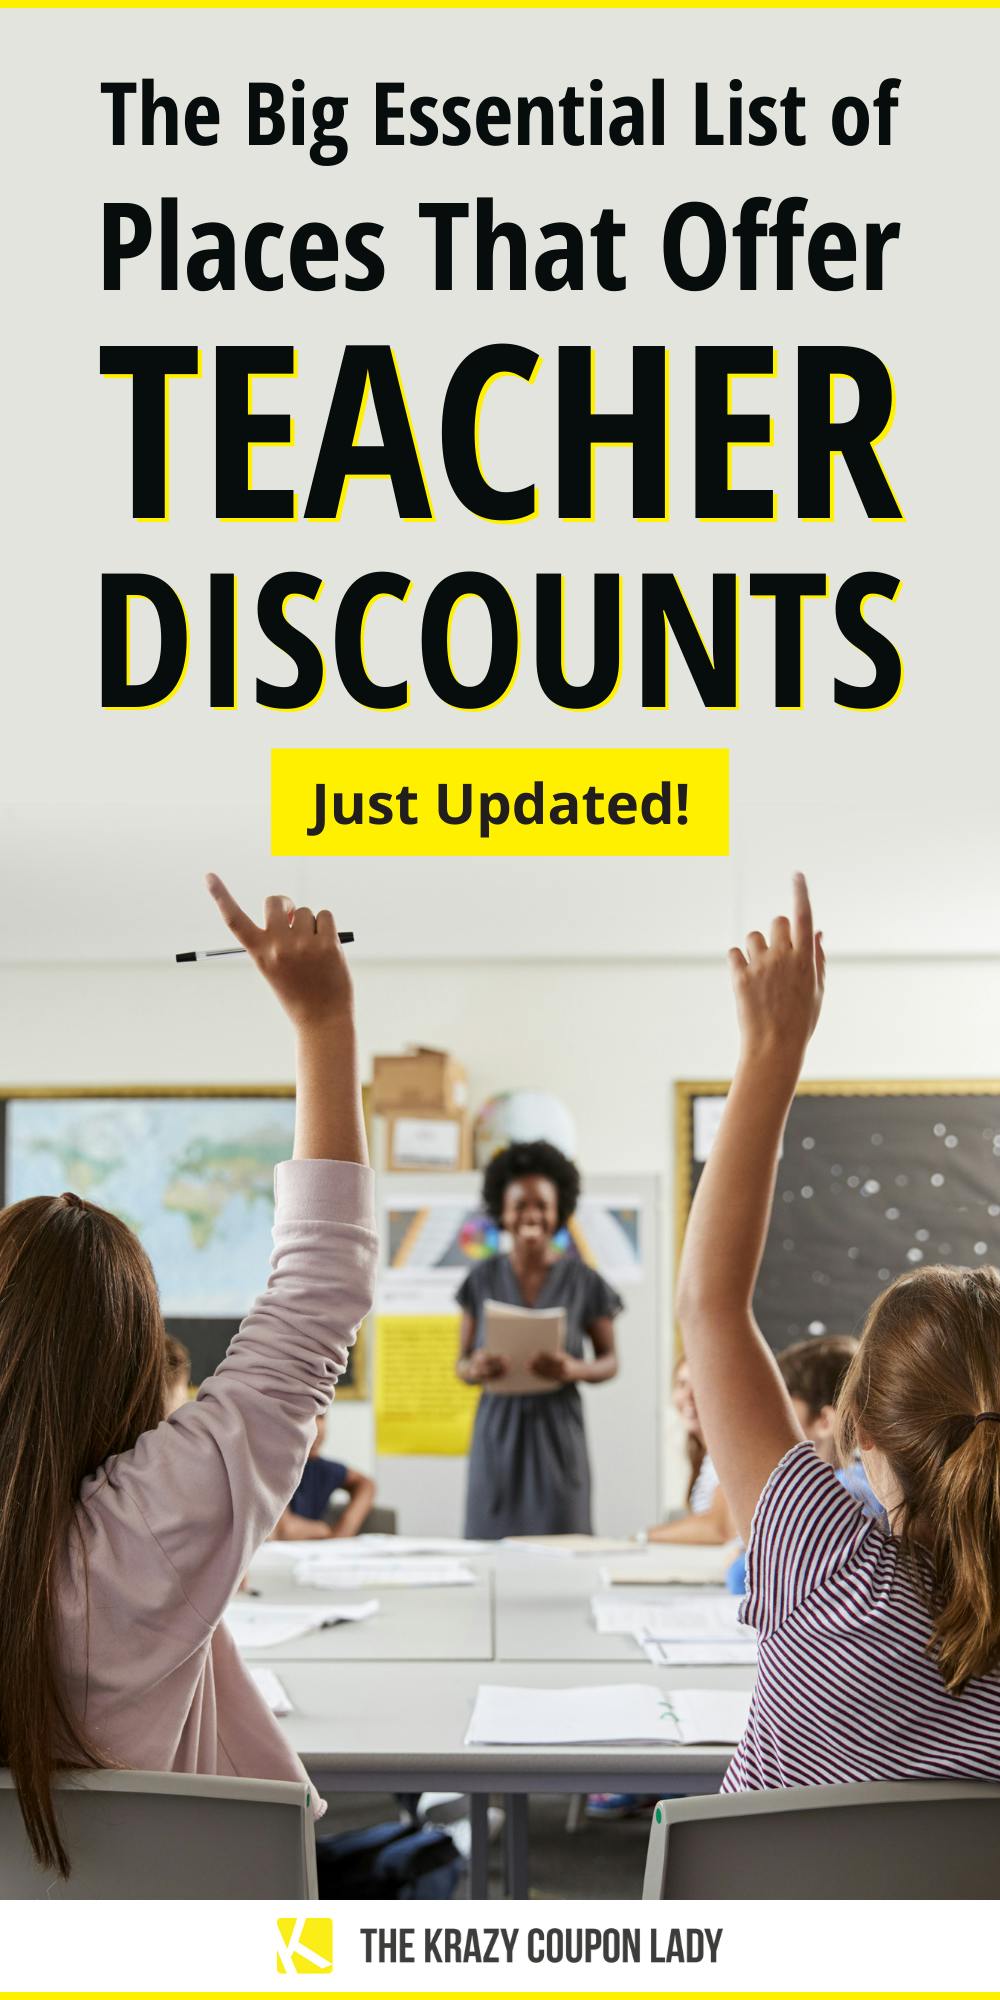 26-retailers-that-offer-teacher-discounts-the-krazy-coupon-lady